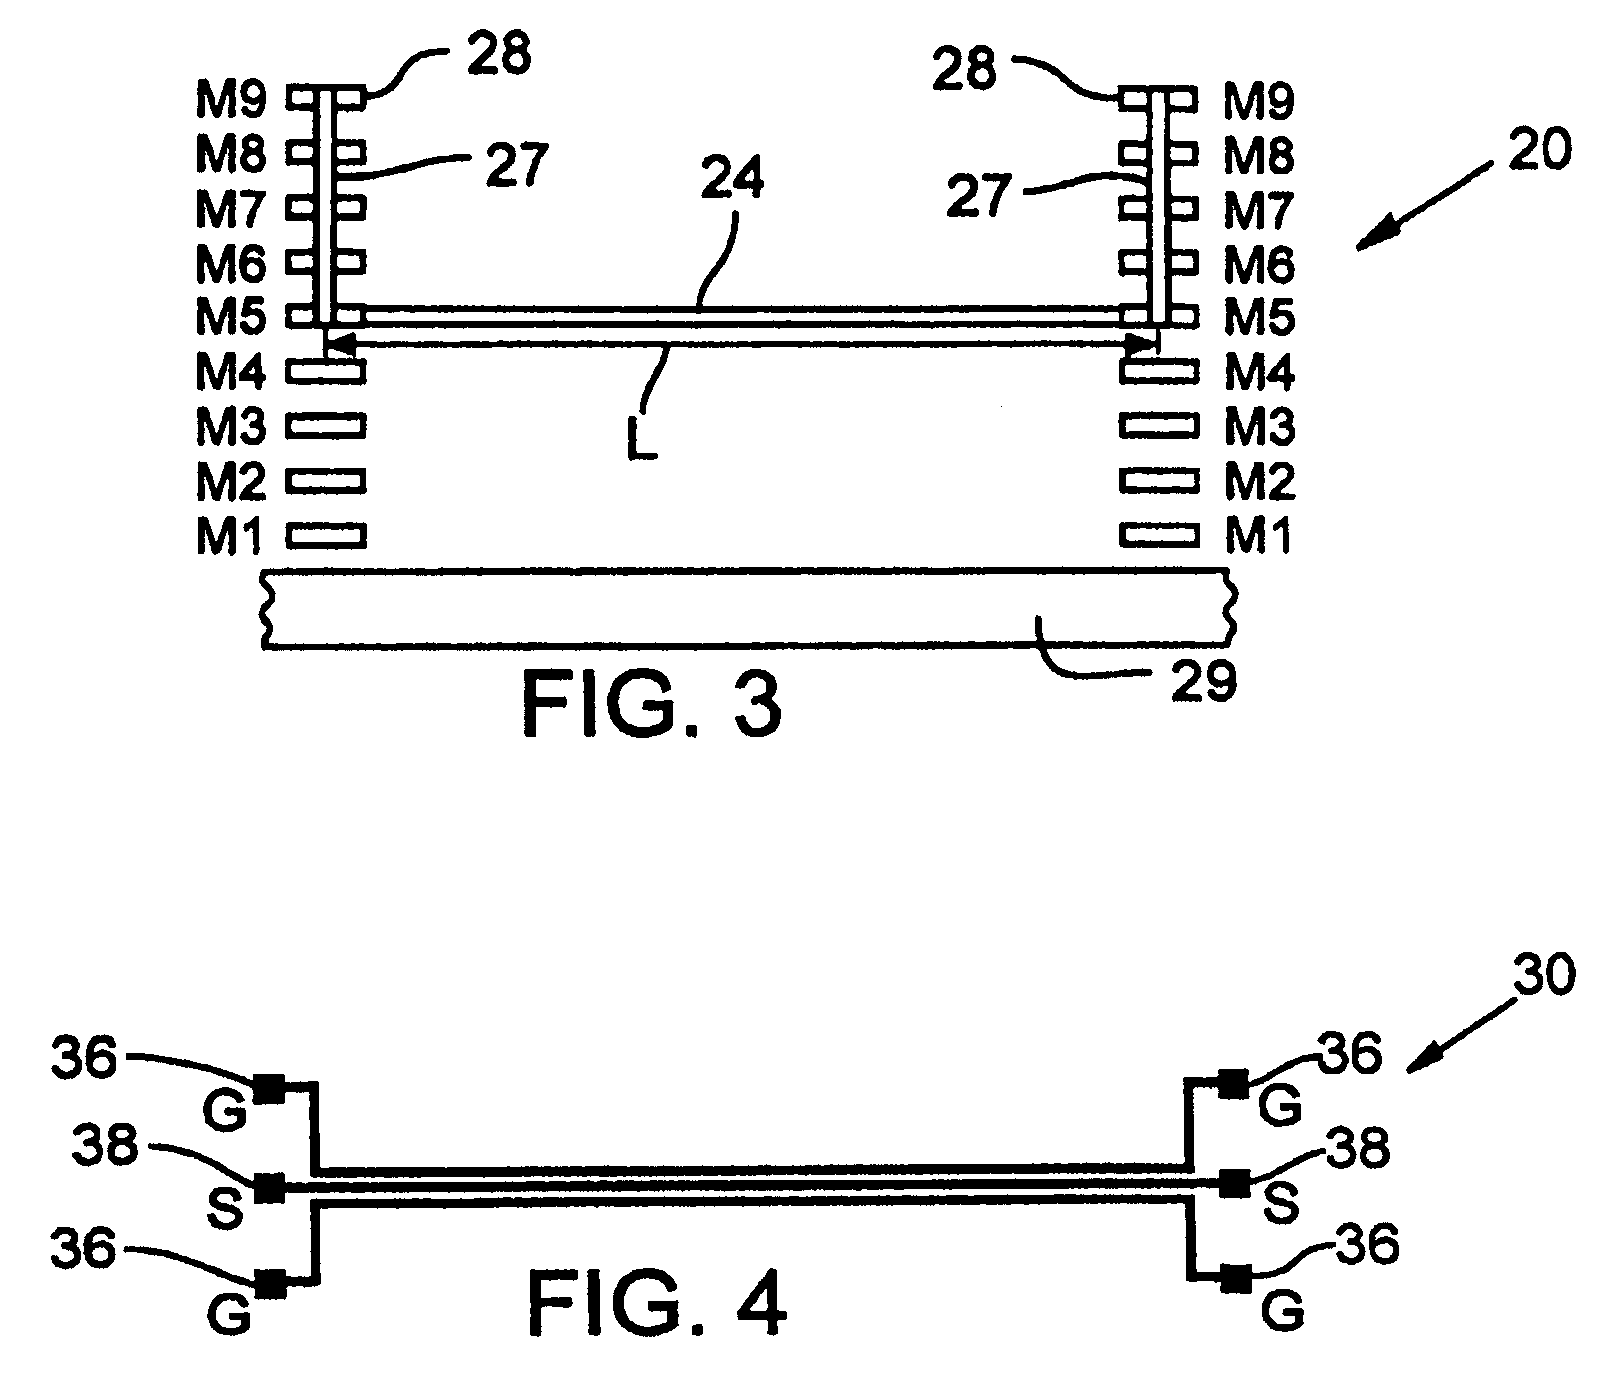 Test structures and method for interconnect impedance property extraction